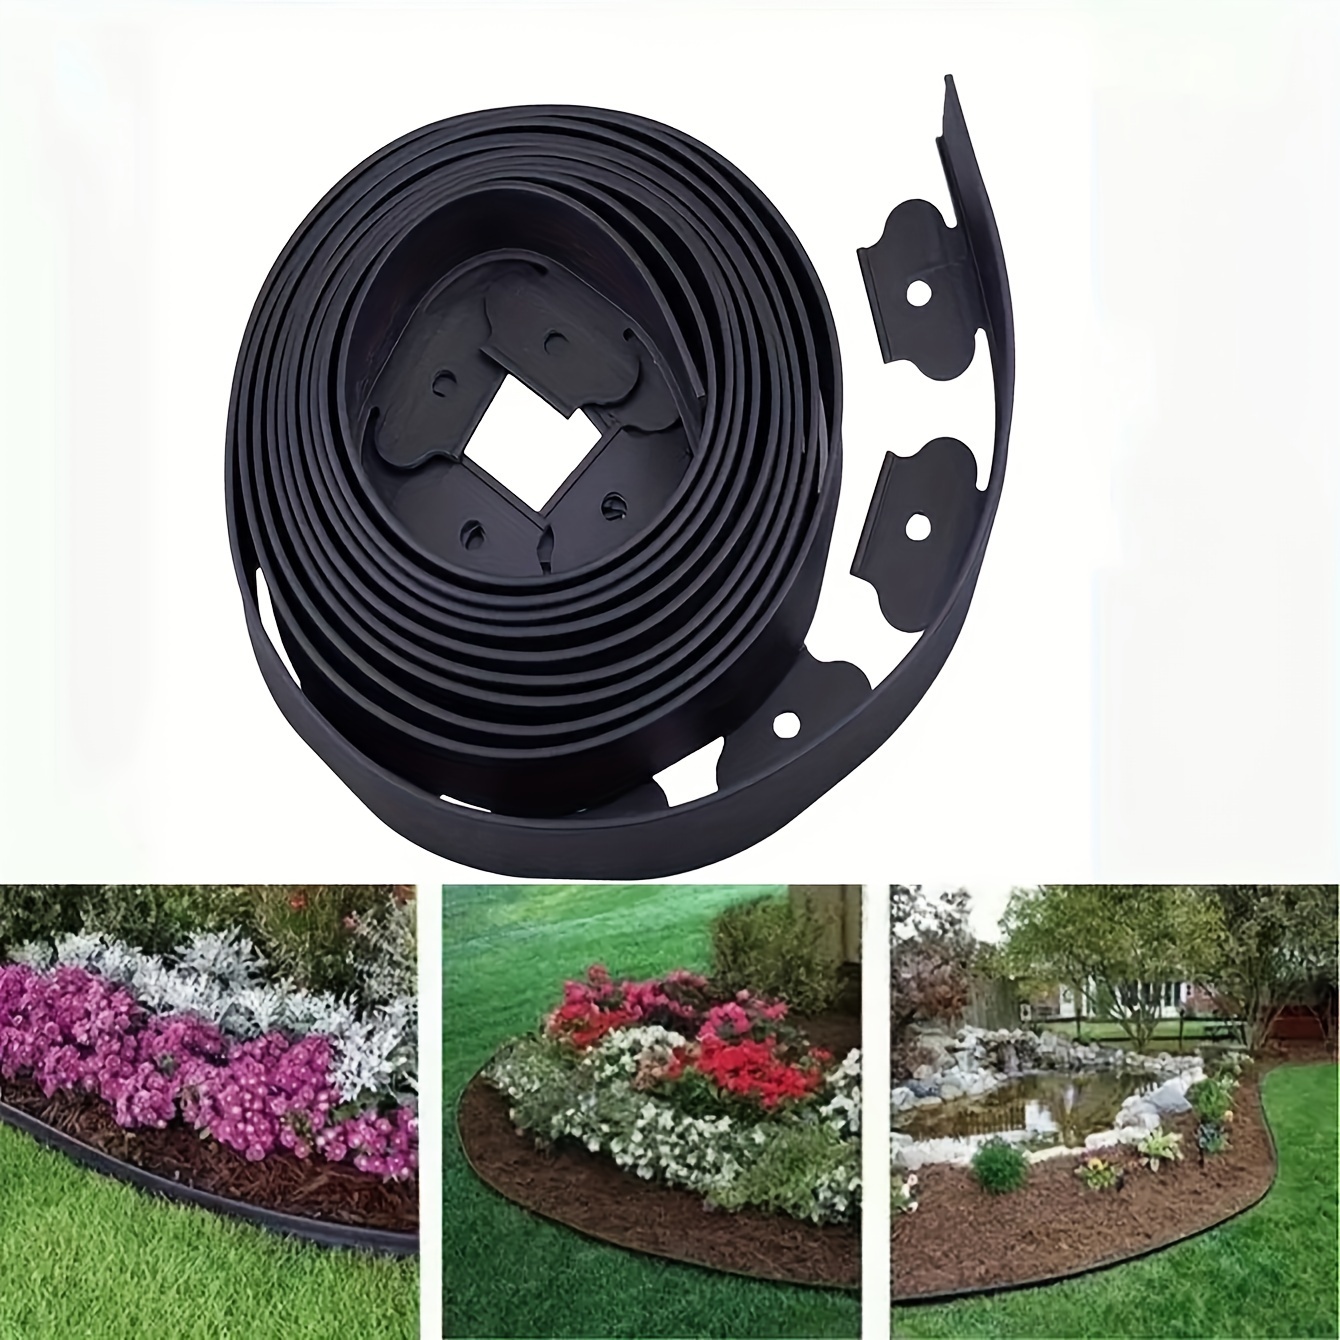 

1 Roll, 16.4ft/5m Garden Landscape Edging Kit, Garden Edging Coil Comes With 15pcs Spikes, No Dig Lawn Border Design No-dig Garden Edging Kit - Perfect Forlandscaping, Flower Gardens & Plant Borders